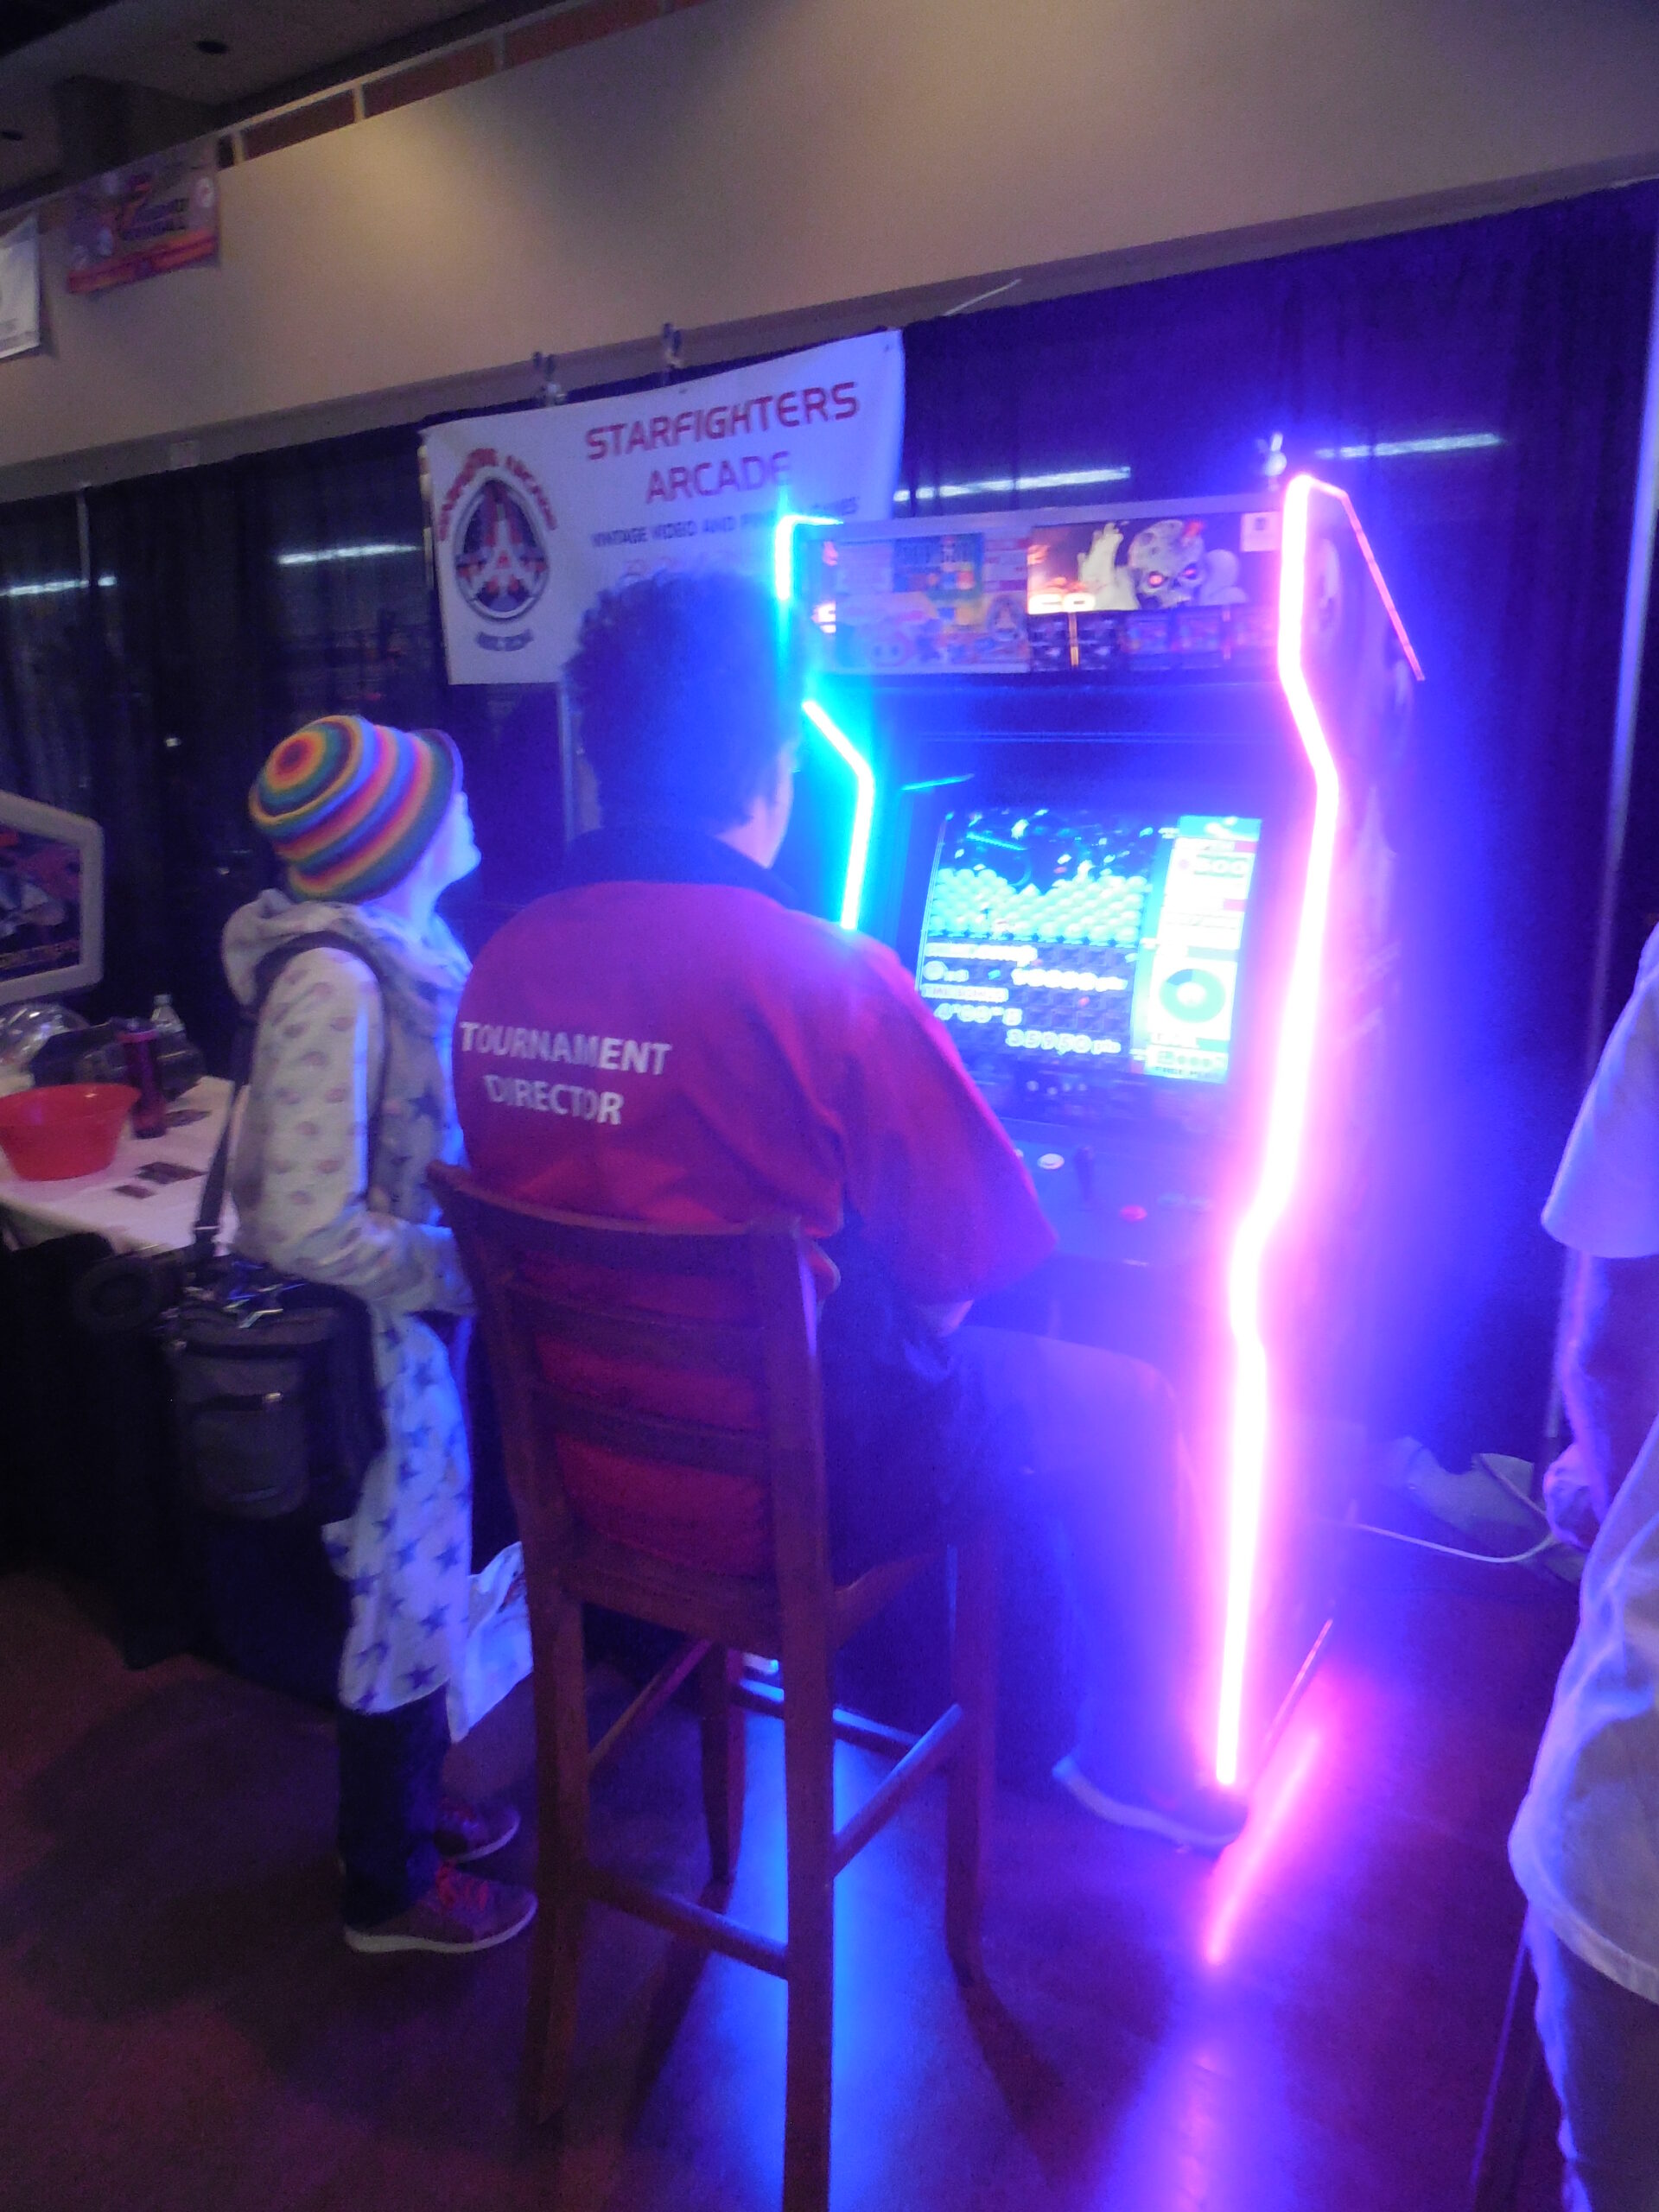 There were some great tournaments and demonstrations all weekend. Here's Seattle Sid playing Mr. Driller. He was going for a new world record.